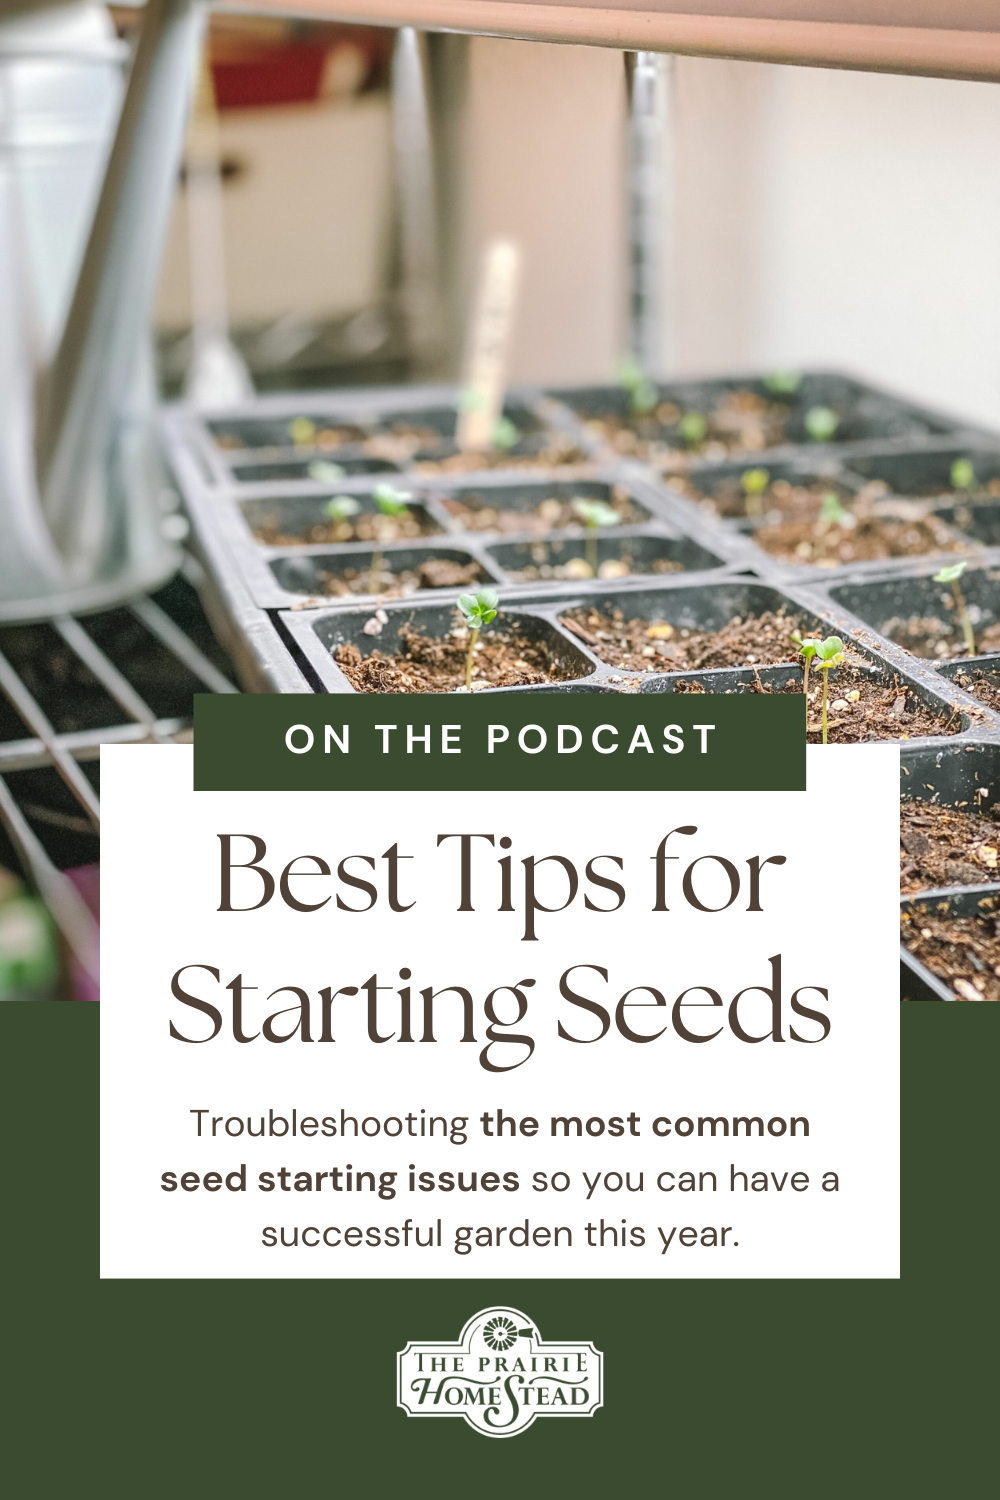 Top Tips for Starting Seeds